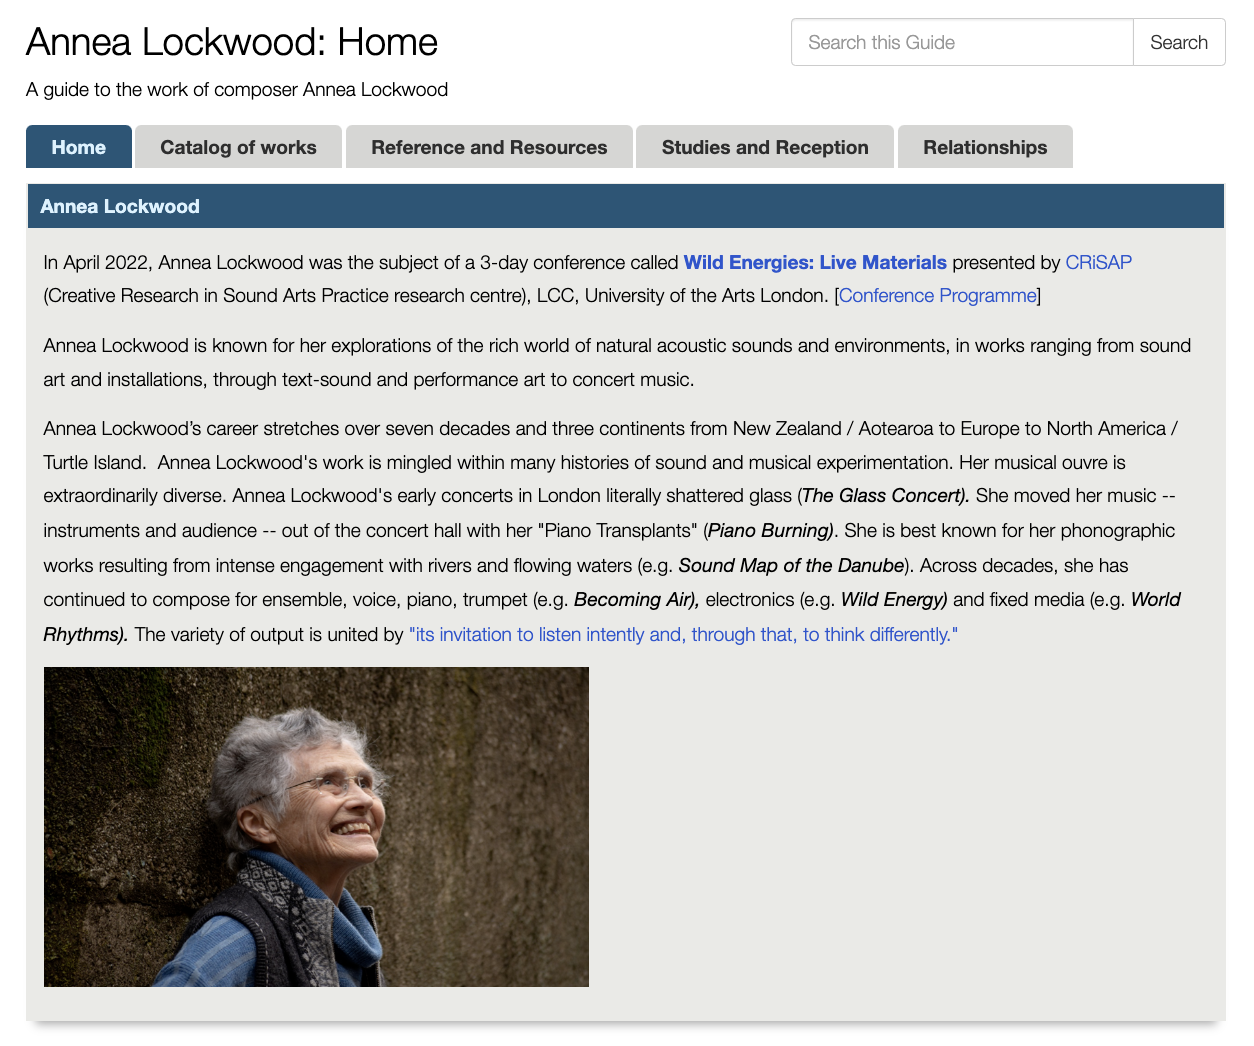 screen shot of a library guide web page - image of annea lockwood smiling, an introductory text and tabs with information, these include 